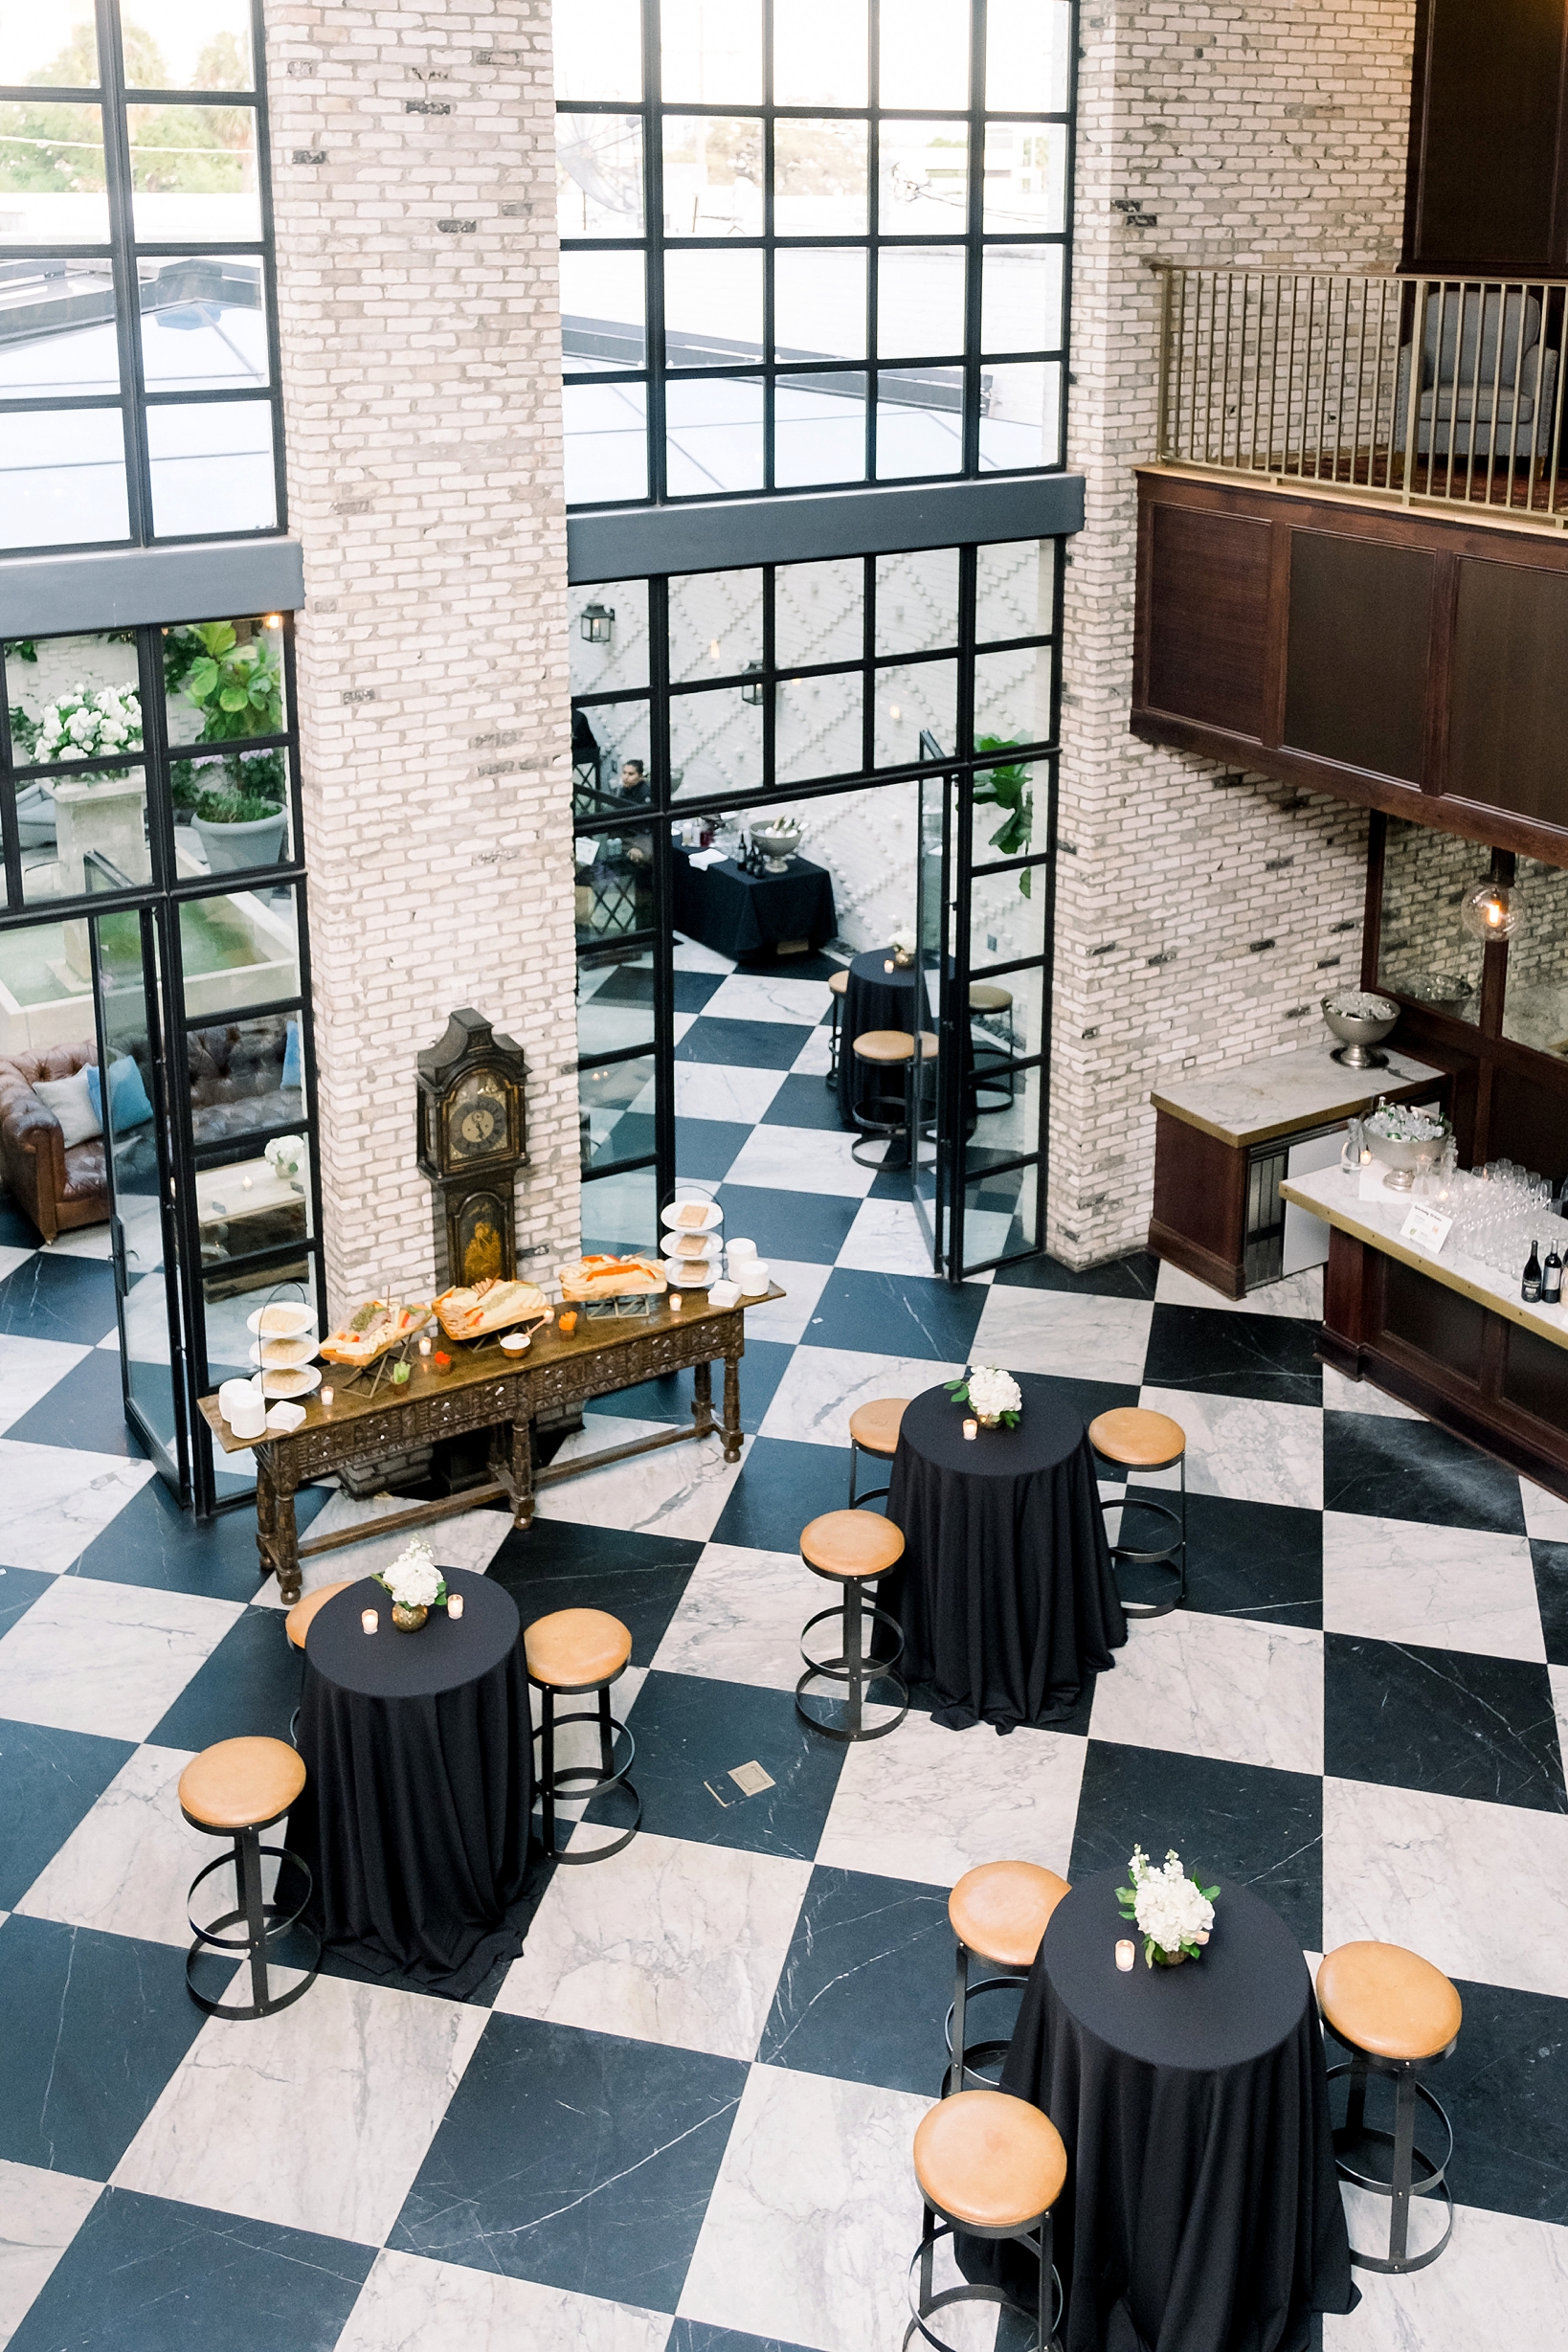 The wedding reception venue at the Oxford exchange complete with checkerboard floor and wooden stools